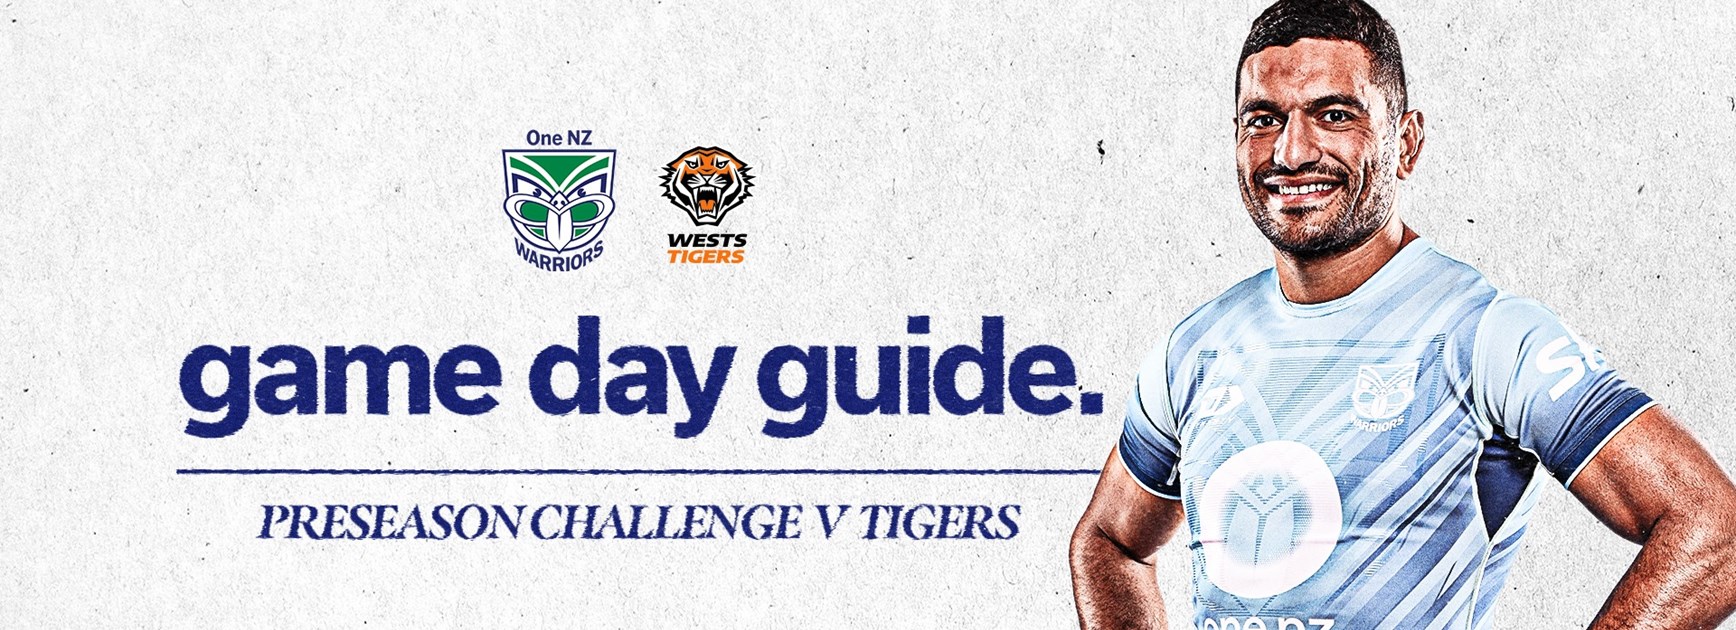 Game Day Guide: Preseason Challenge in Christchurch